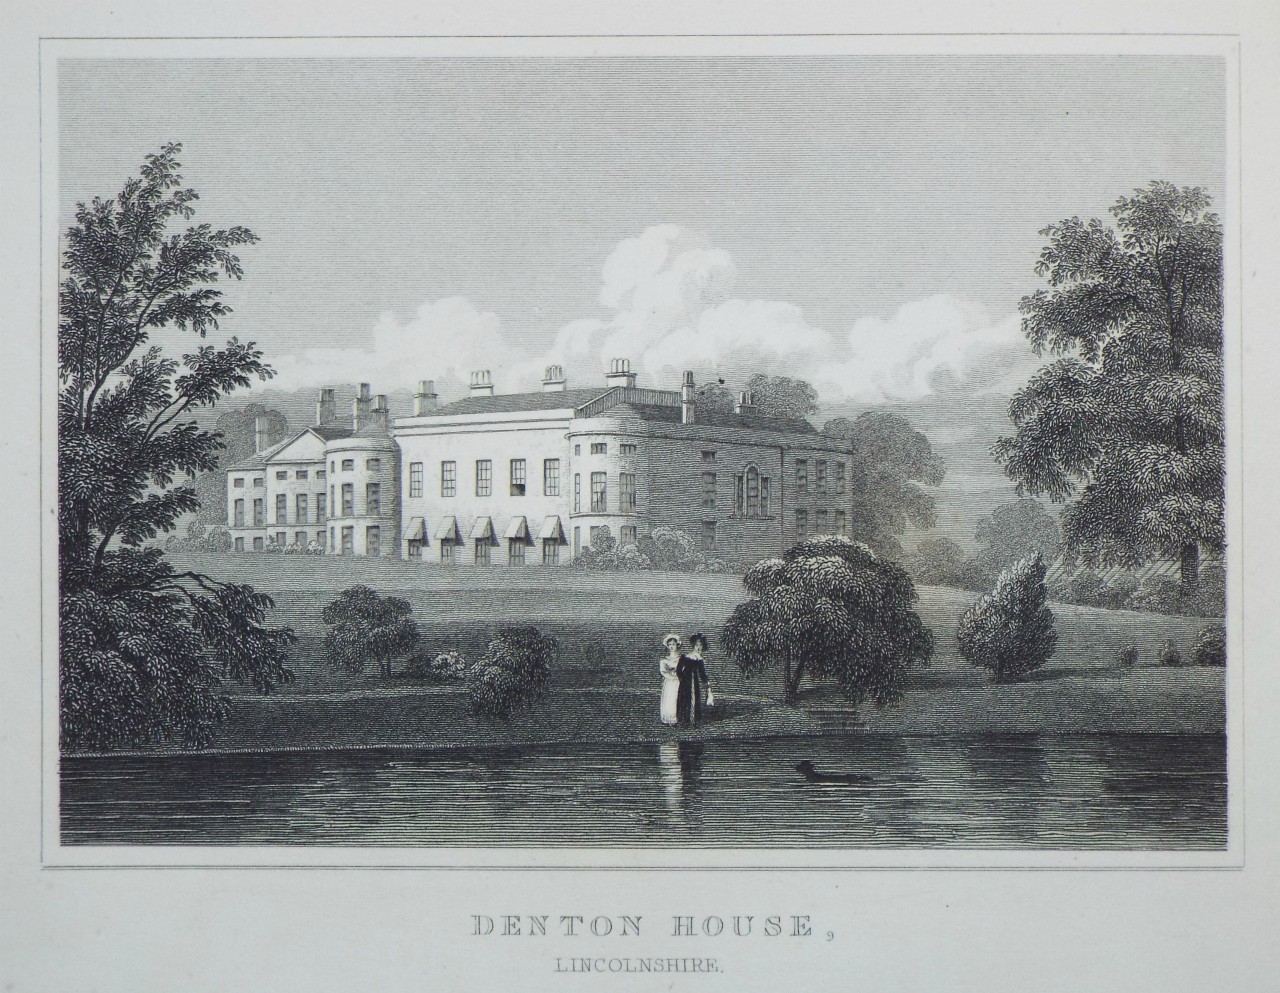 Print - Denton House, Lincolnshire. - Lacey